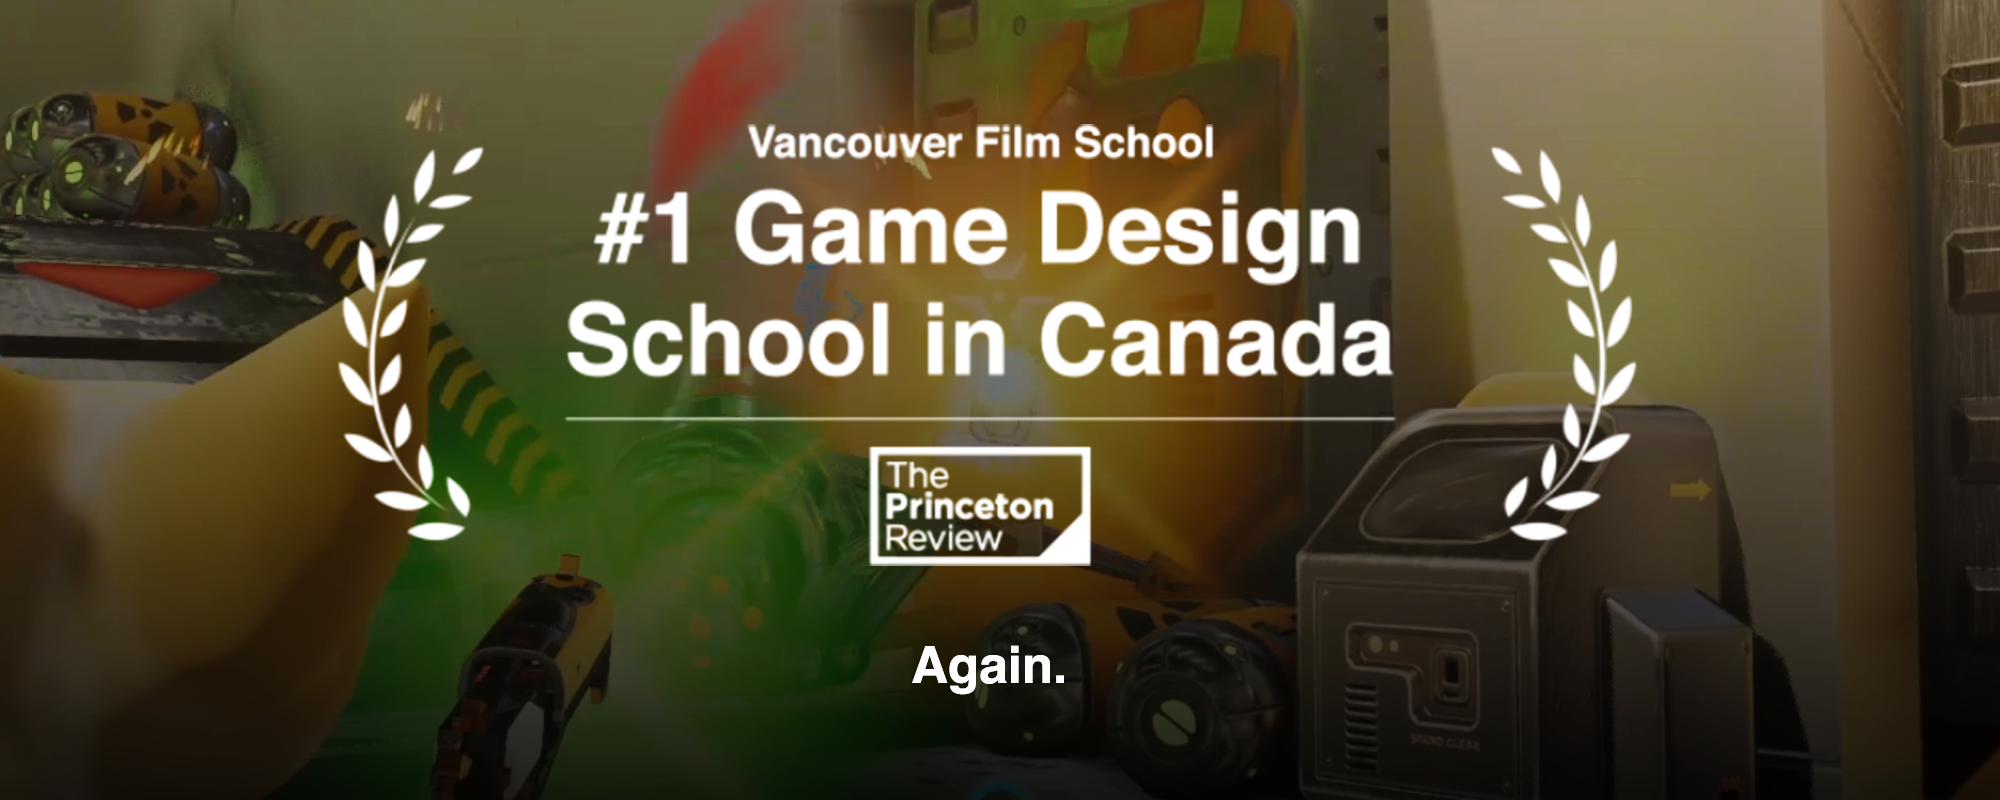 VFS Named the #1 Game Design School in Canada by The Princeton Review